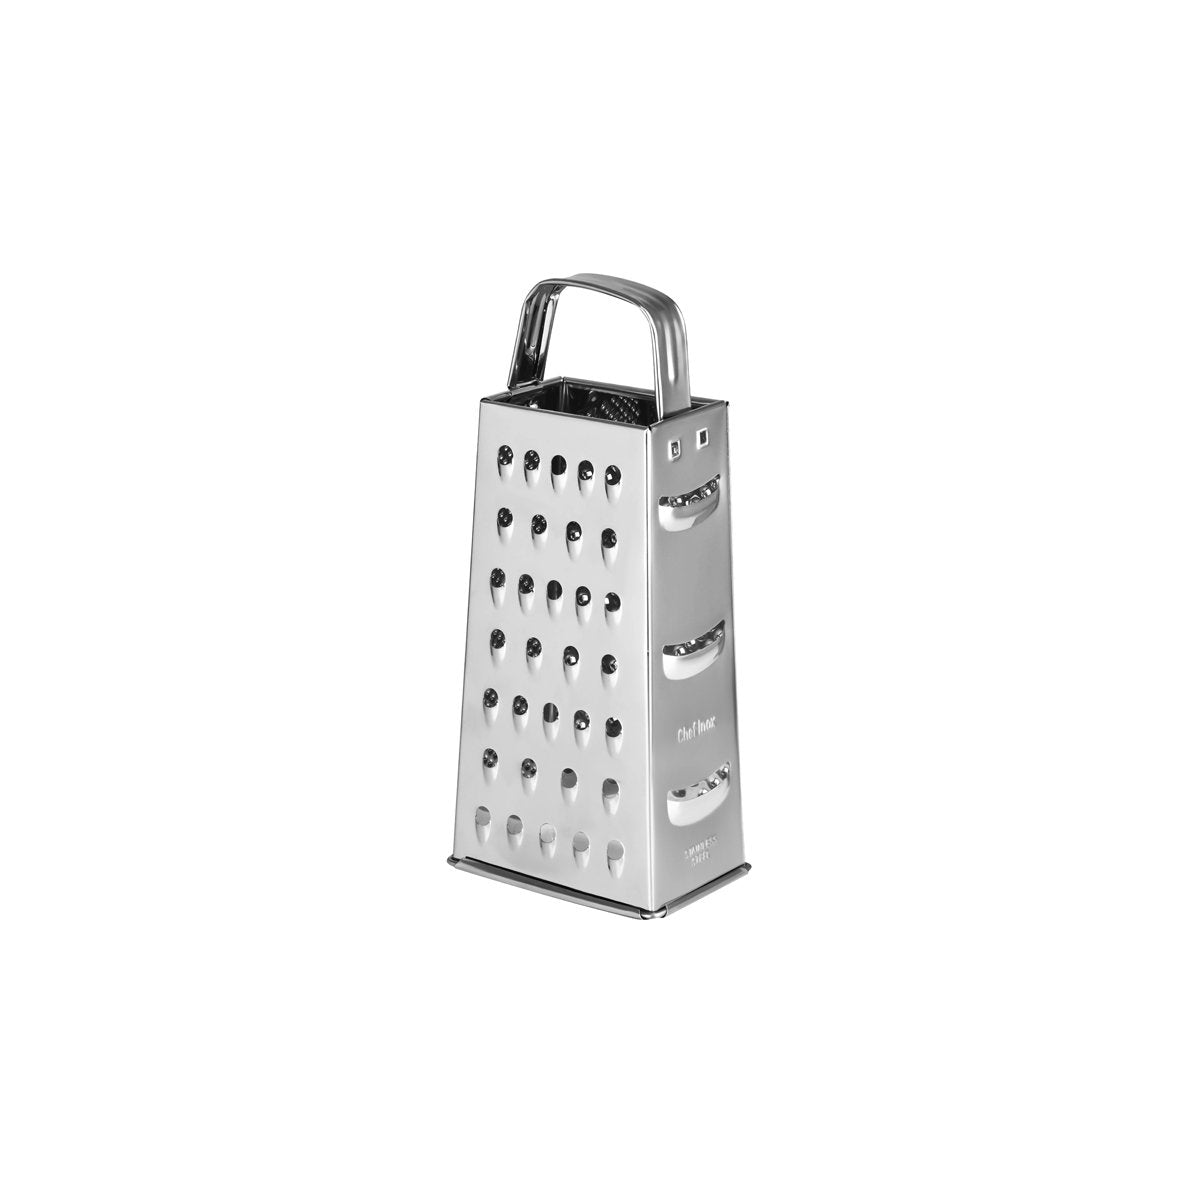 07340 Chef Inox Grater 4 Sided Stainless Steel Handle 170mm Tomkin Australia Hospitality Supplies